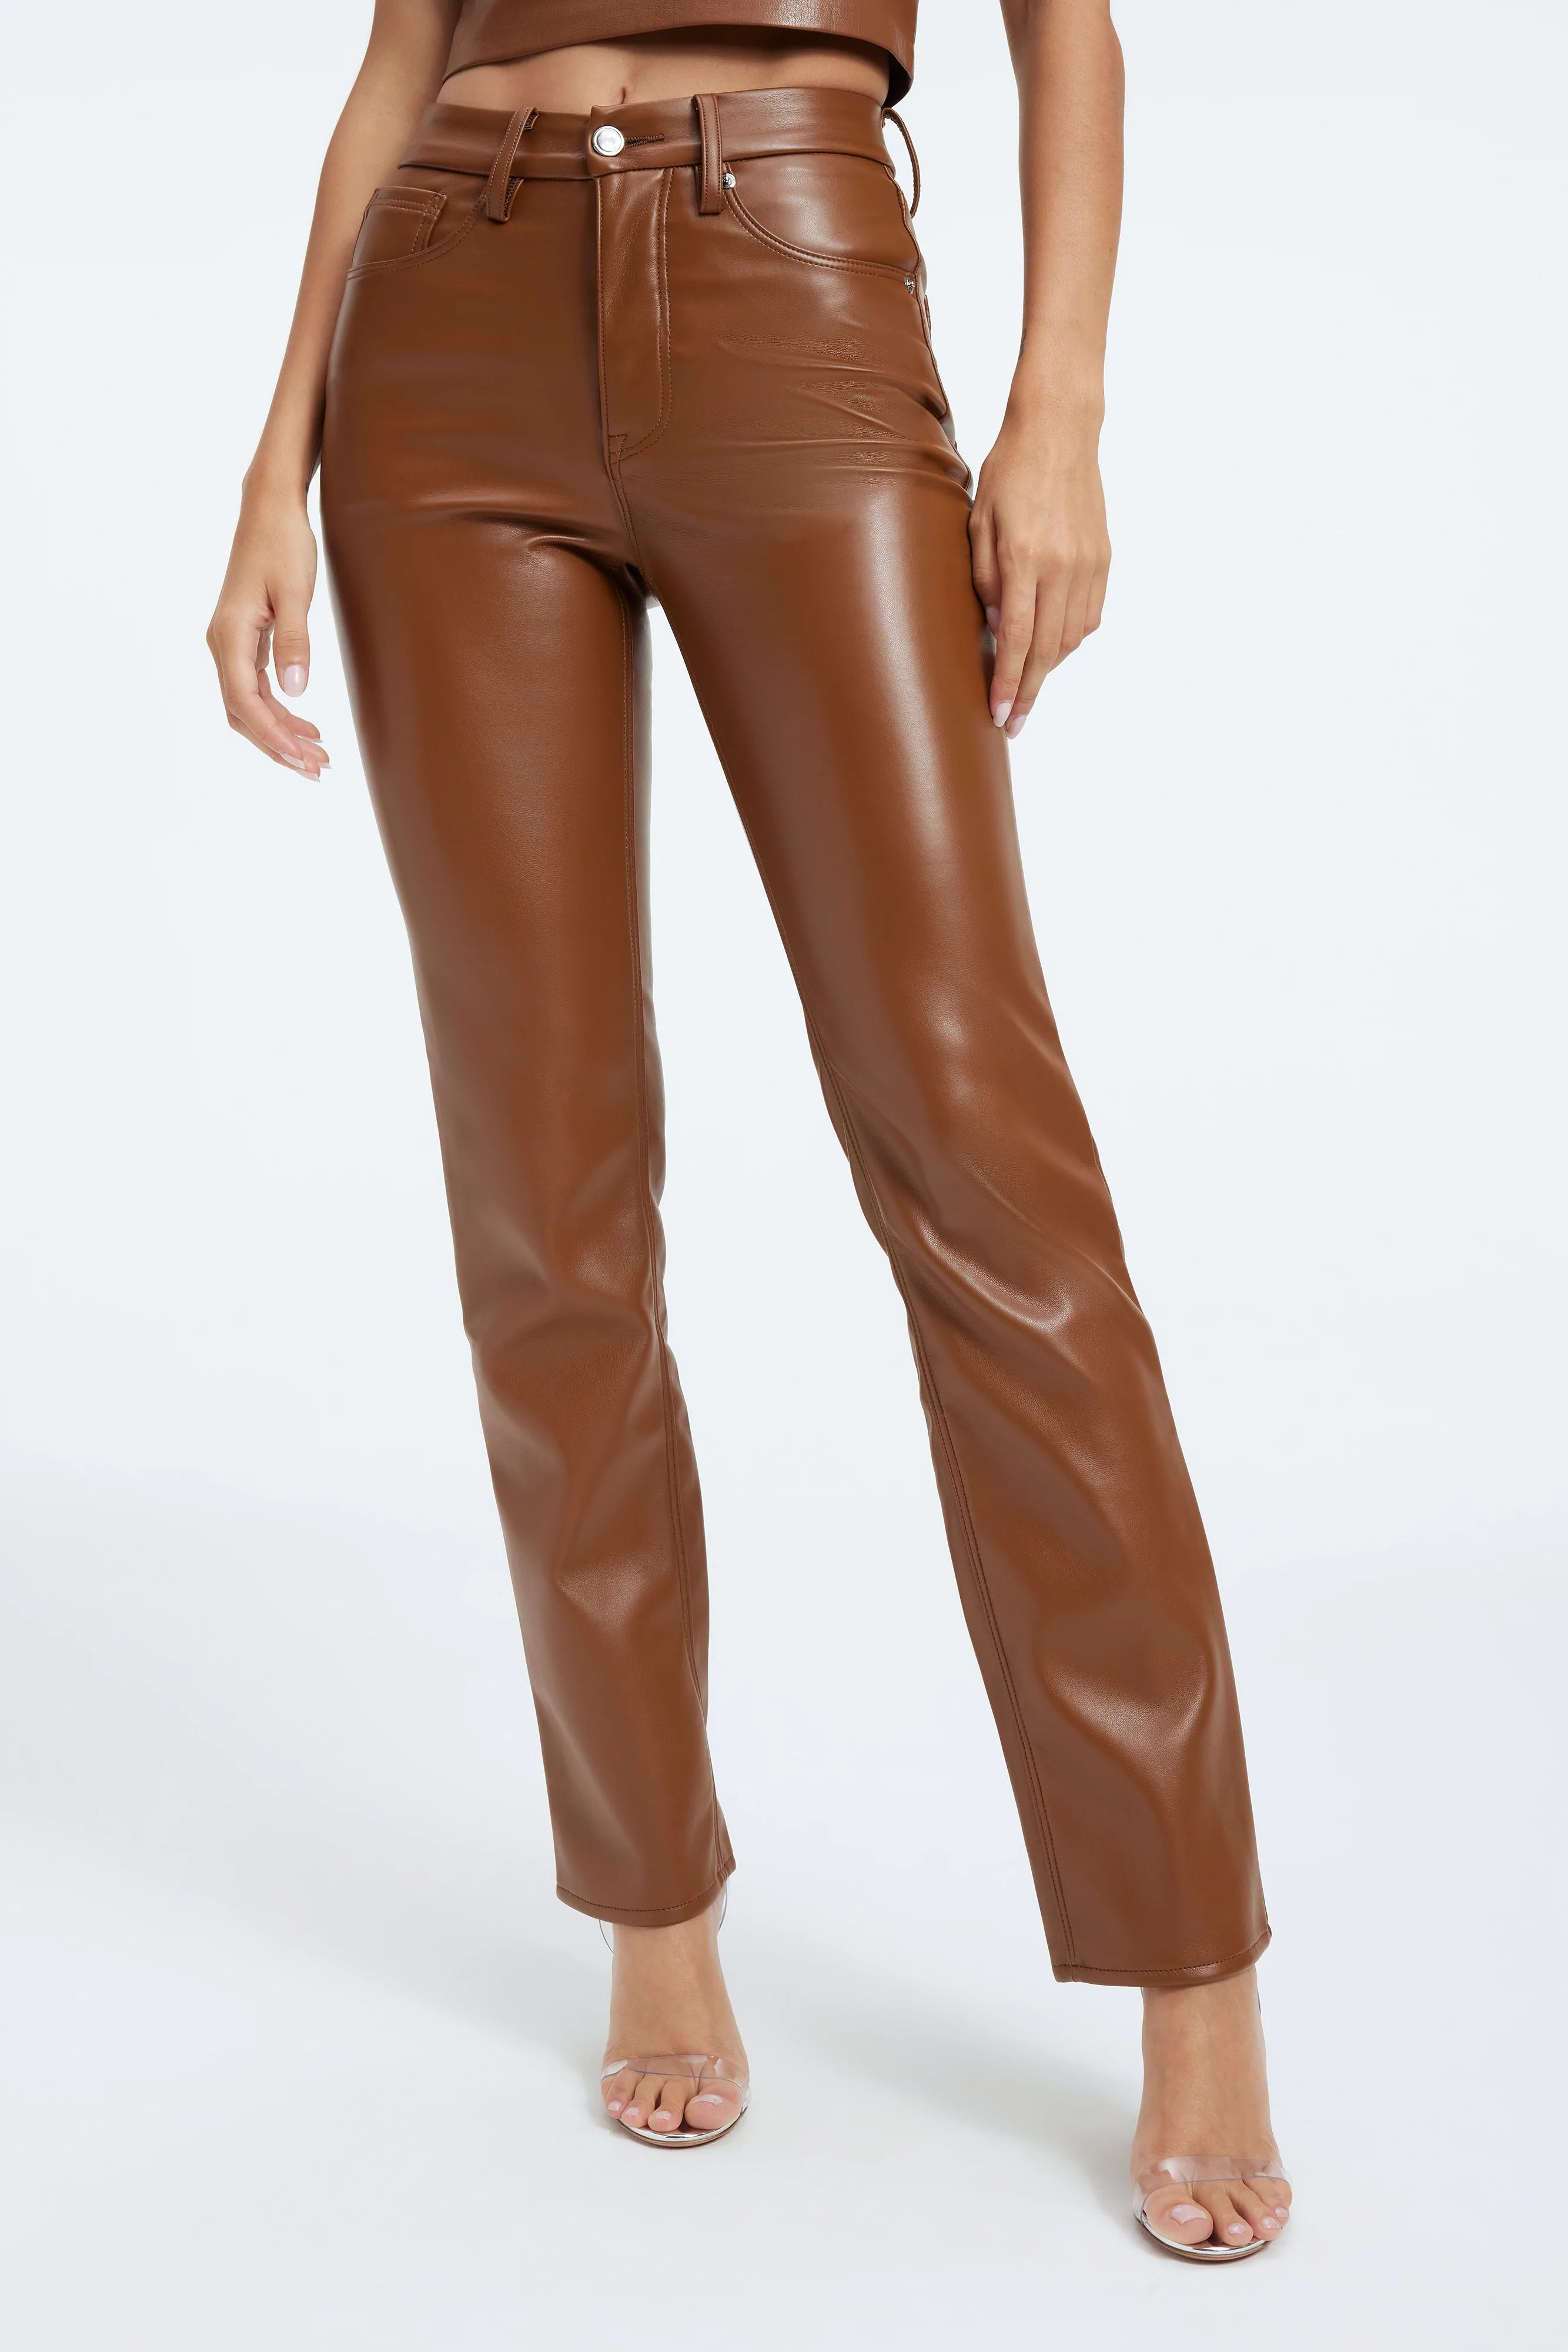 GOOD ICON FAUX LEATHER PANTS | BURNT CARAMEL002 | Good American